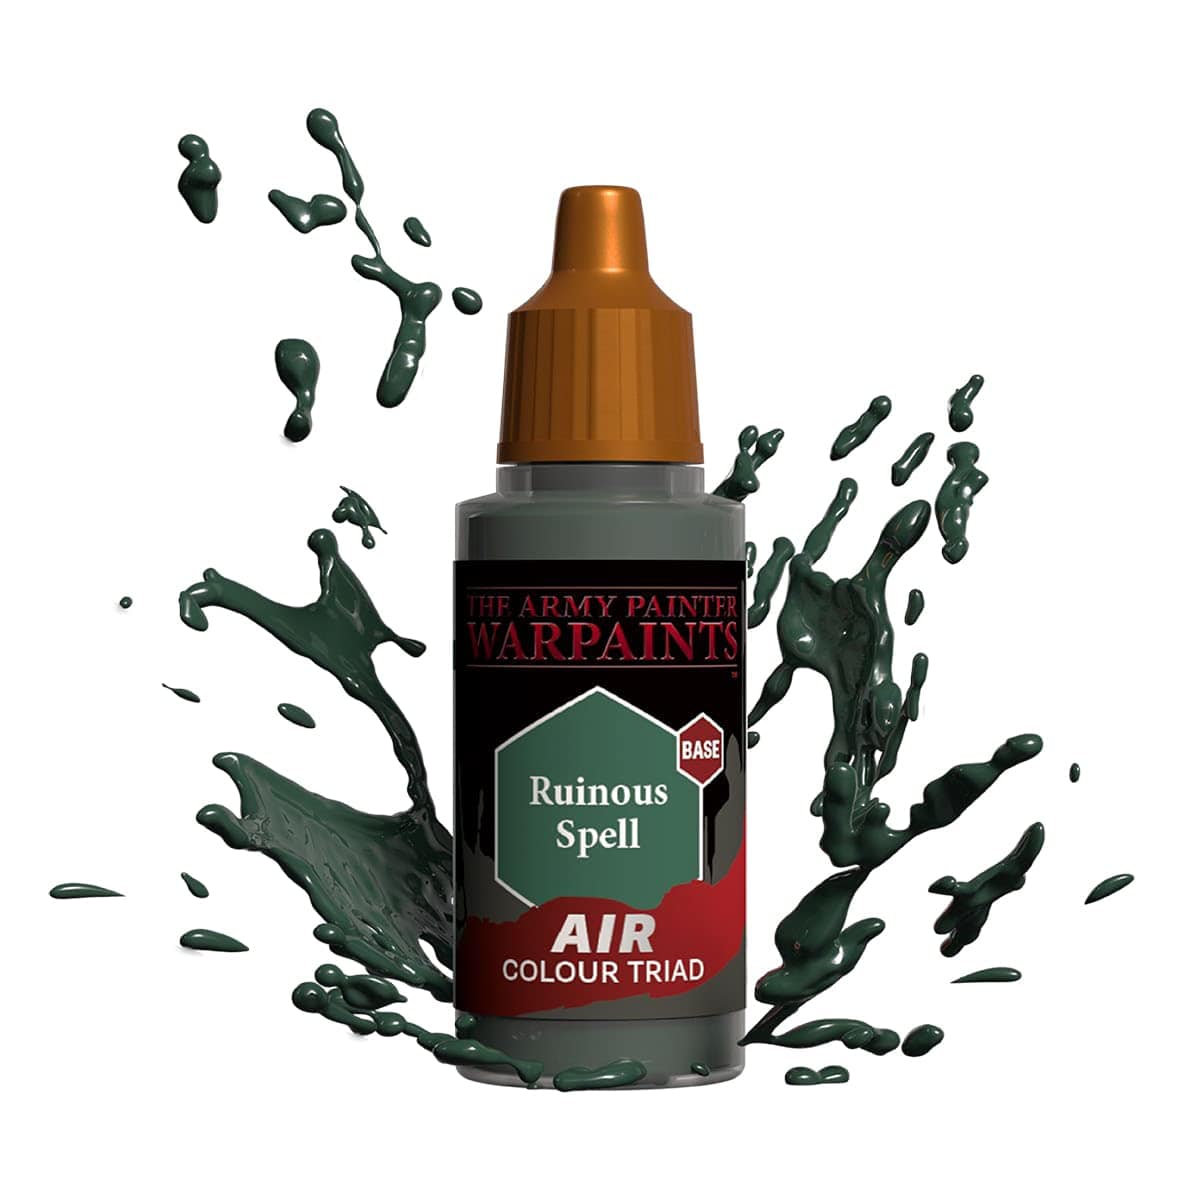 The Army Painter Accessories The Army Painter Warpaints Air: Ruinous Spell 18ml